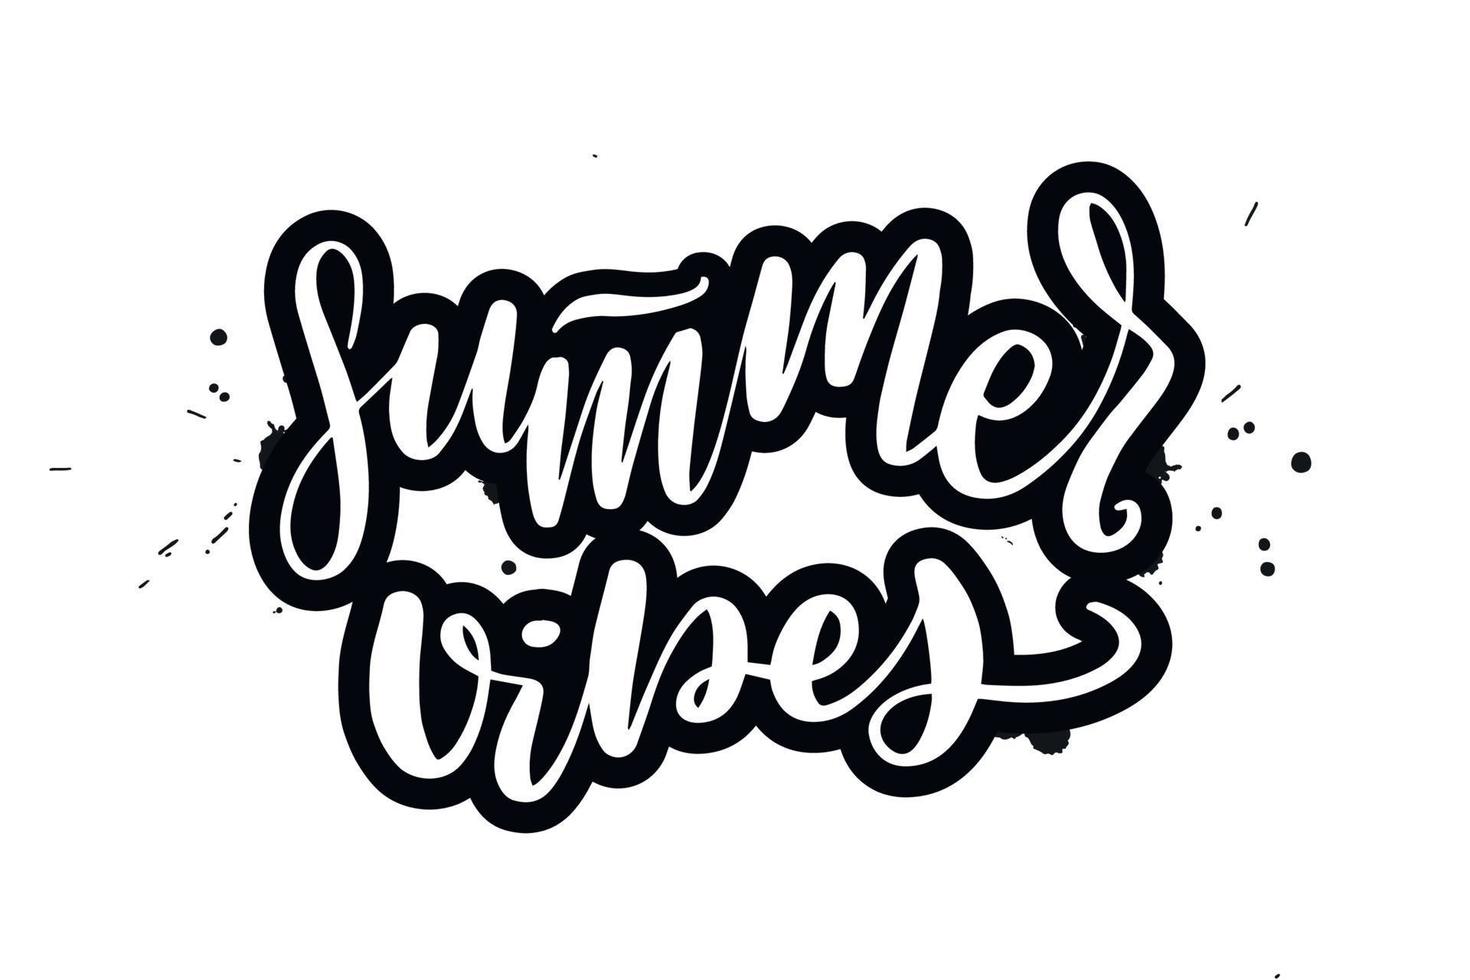 Inspirational handwritten brush lettering summer vibes. Vector calligraphy illustration isolated on white background. Typography for banners, badges, postcard, tshirt, prints, posters.